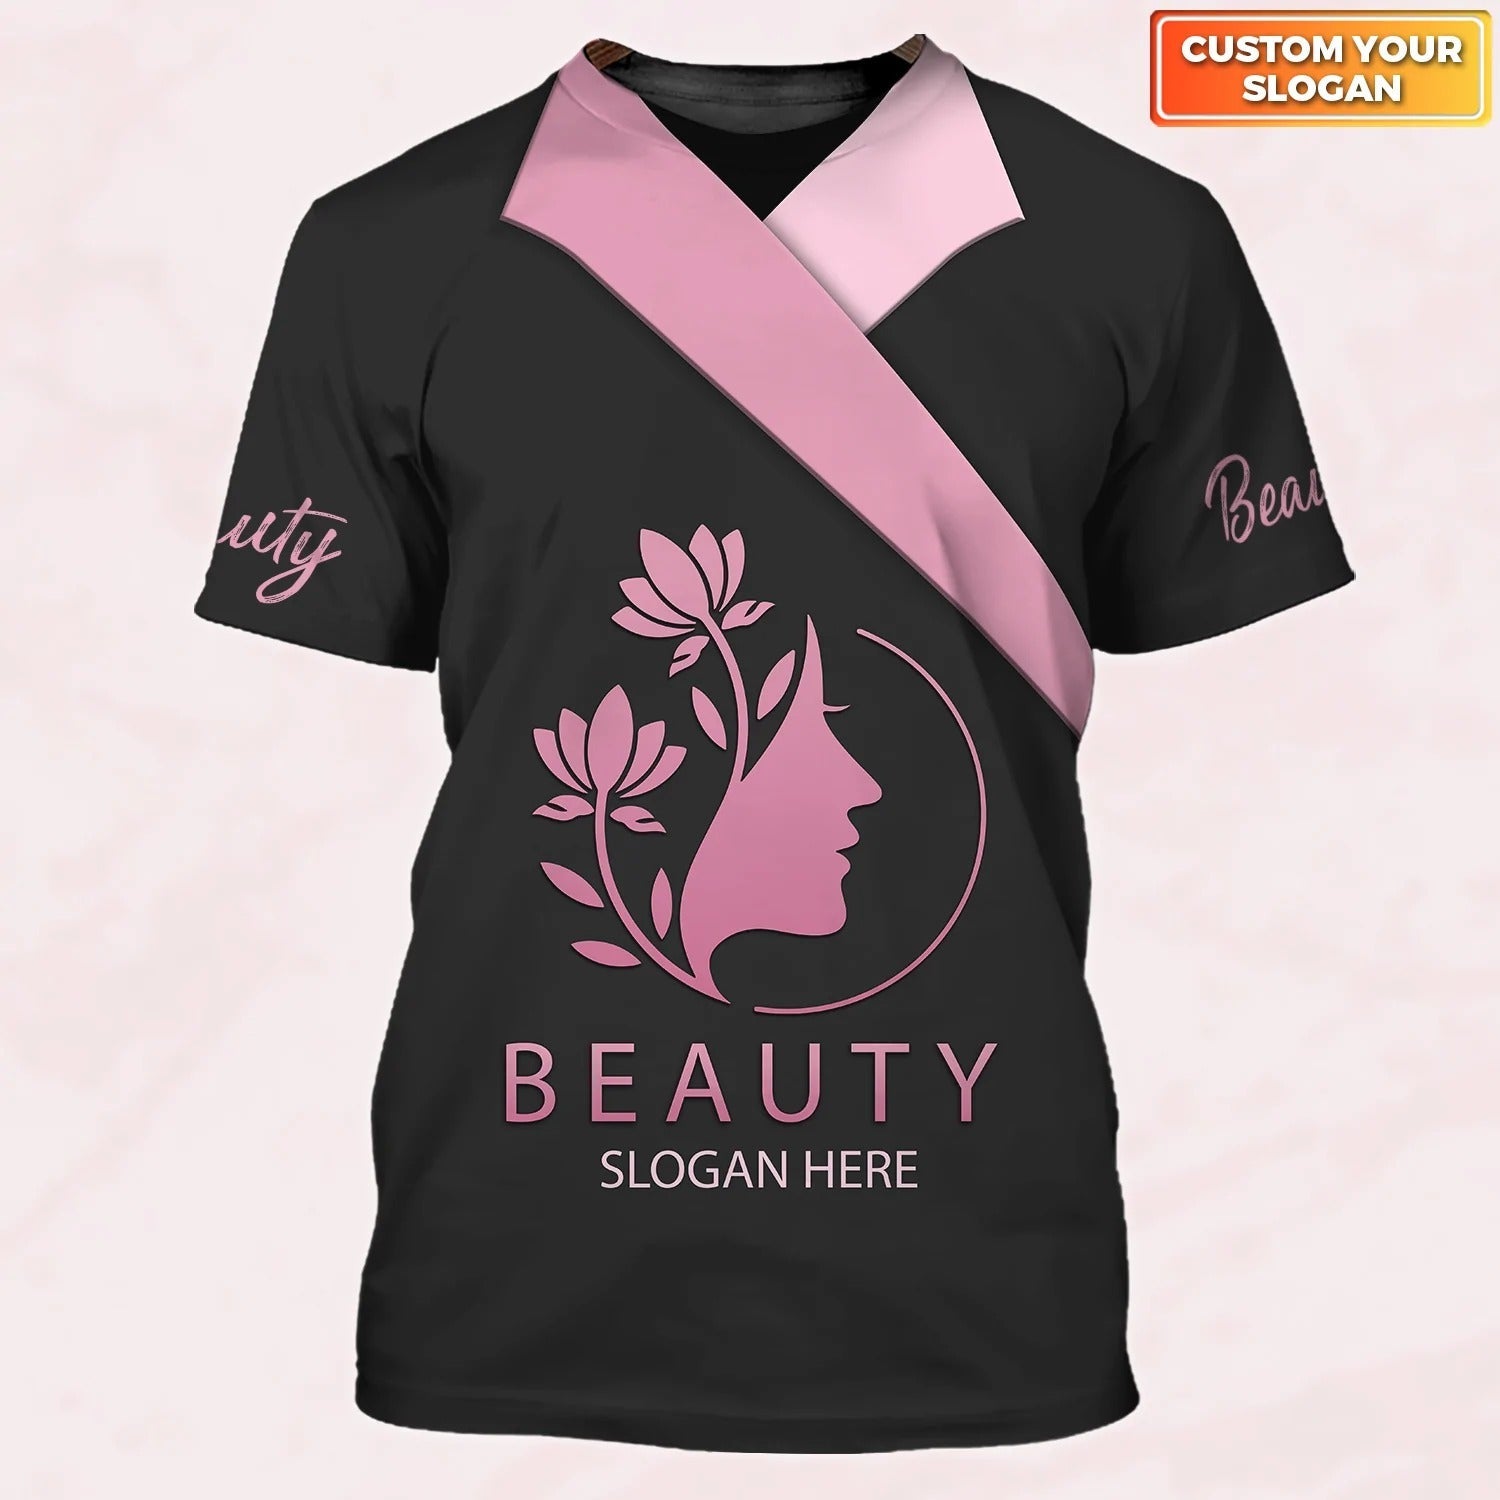 Beauty Consultant Personalized Your Slogan 3D Tshirt For Make Up Artist/ Beauty Tech Shirts For Her